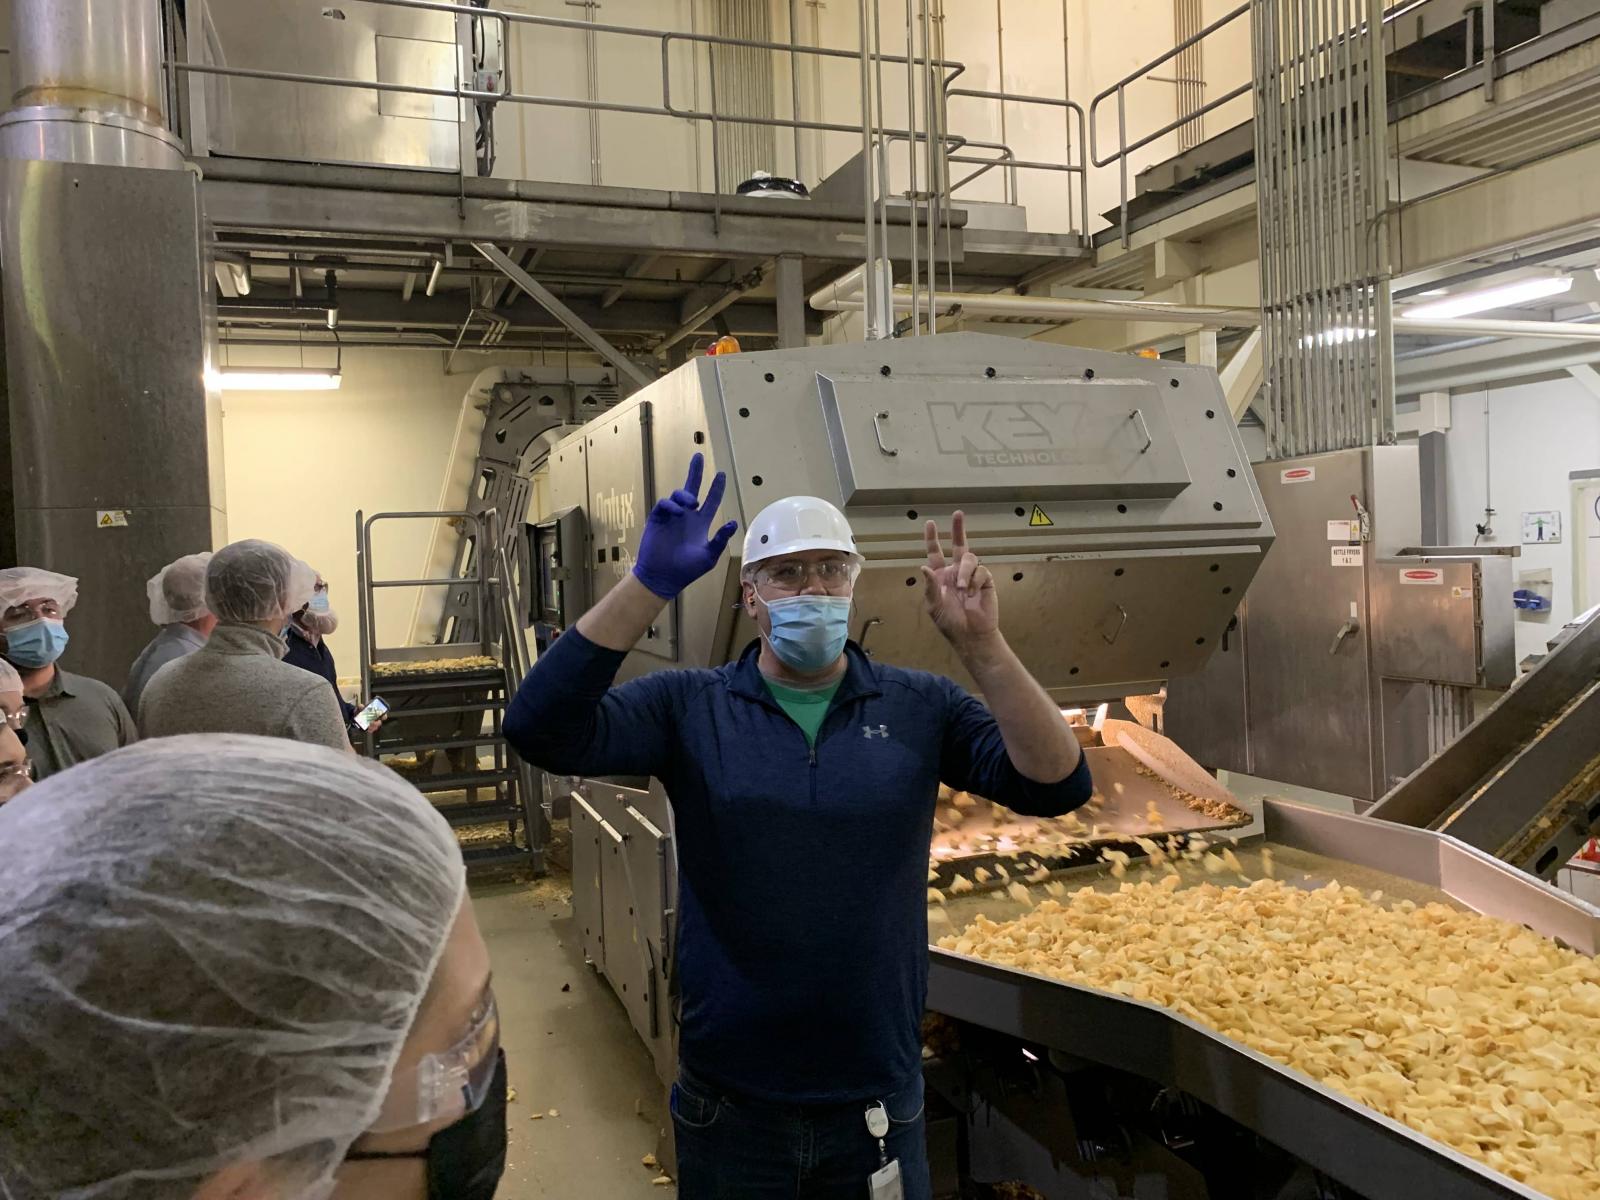 LEAD 39 student posing in front of conveyor belt loaded with potato chips.